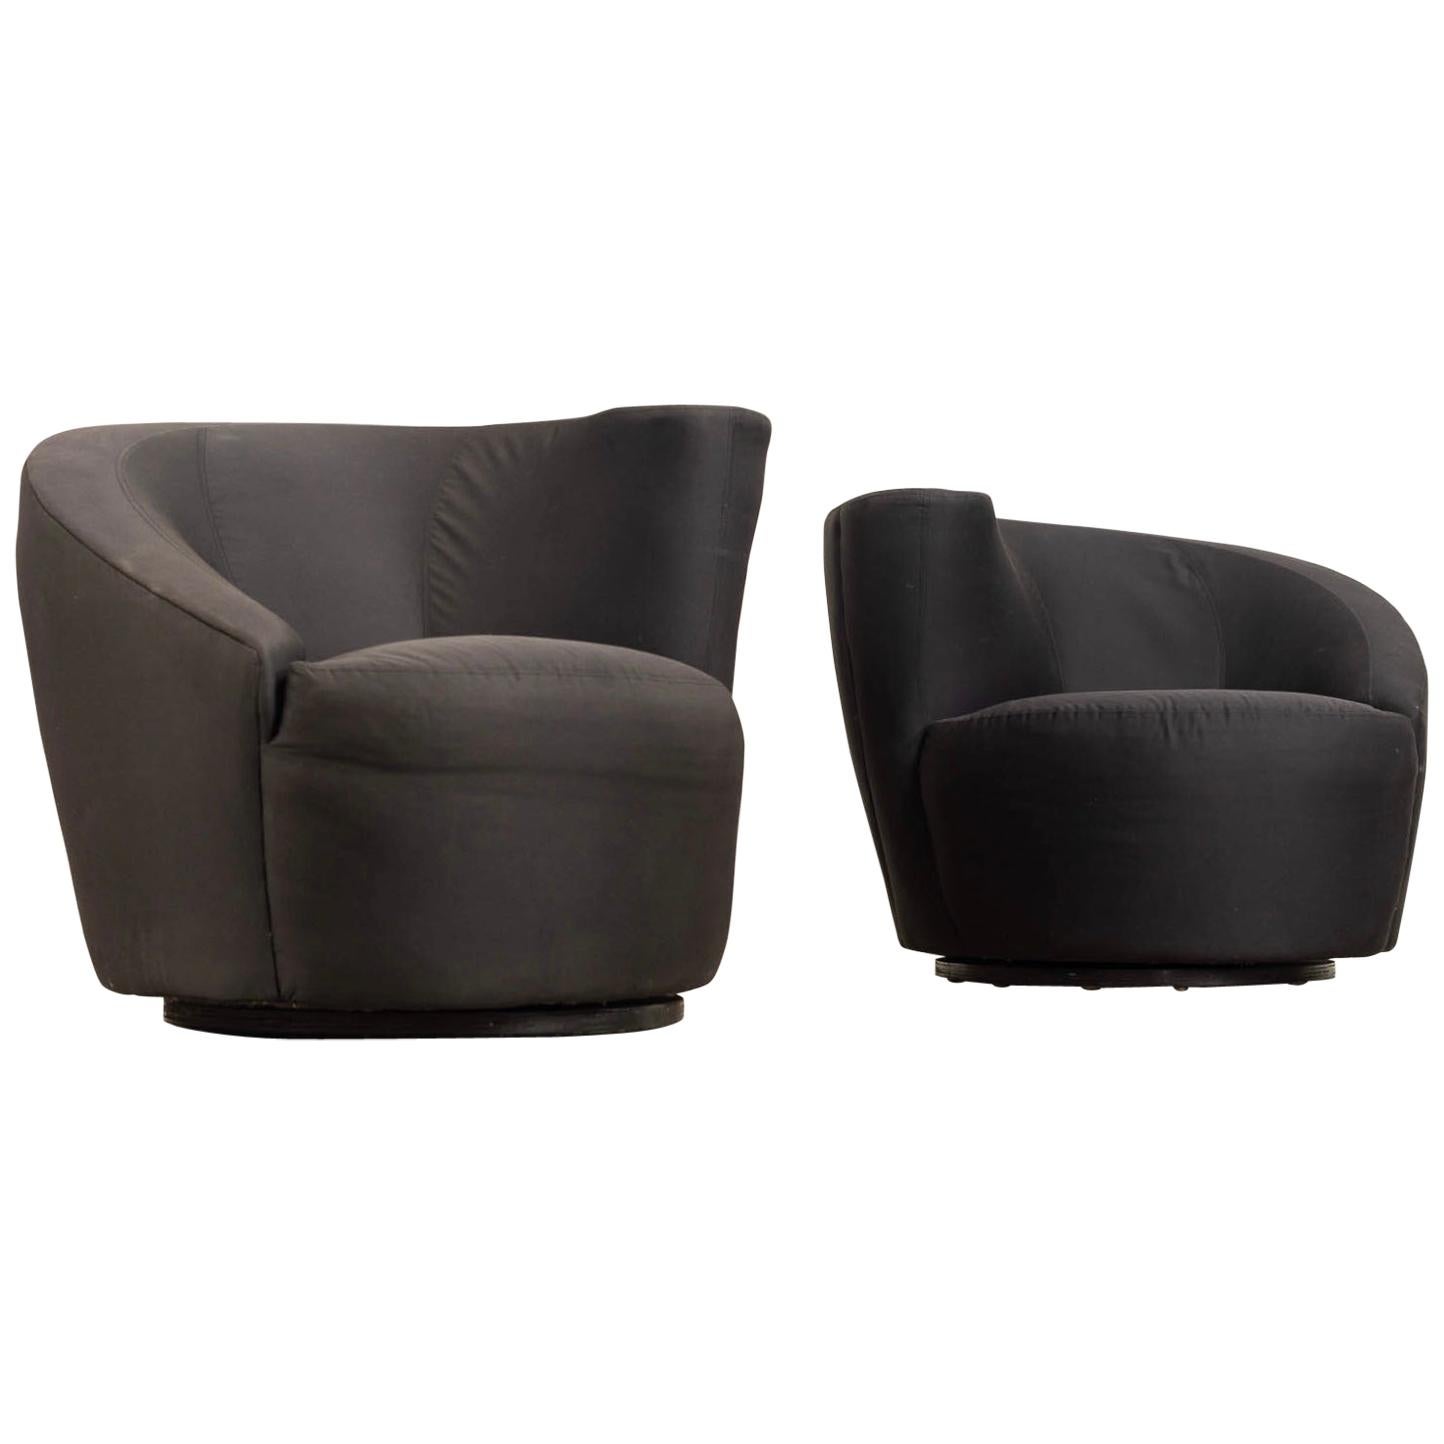 Midcentury Vladimir Kagan for Directional Black Nautilus Lounge Chairs, a Pair For Sale